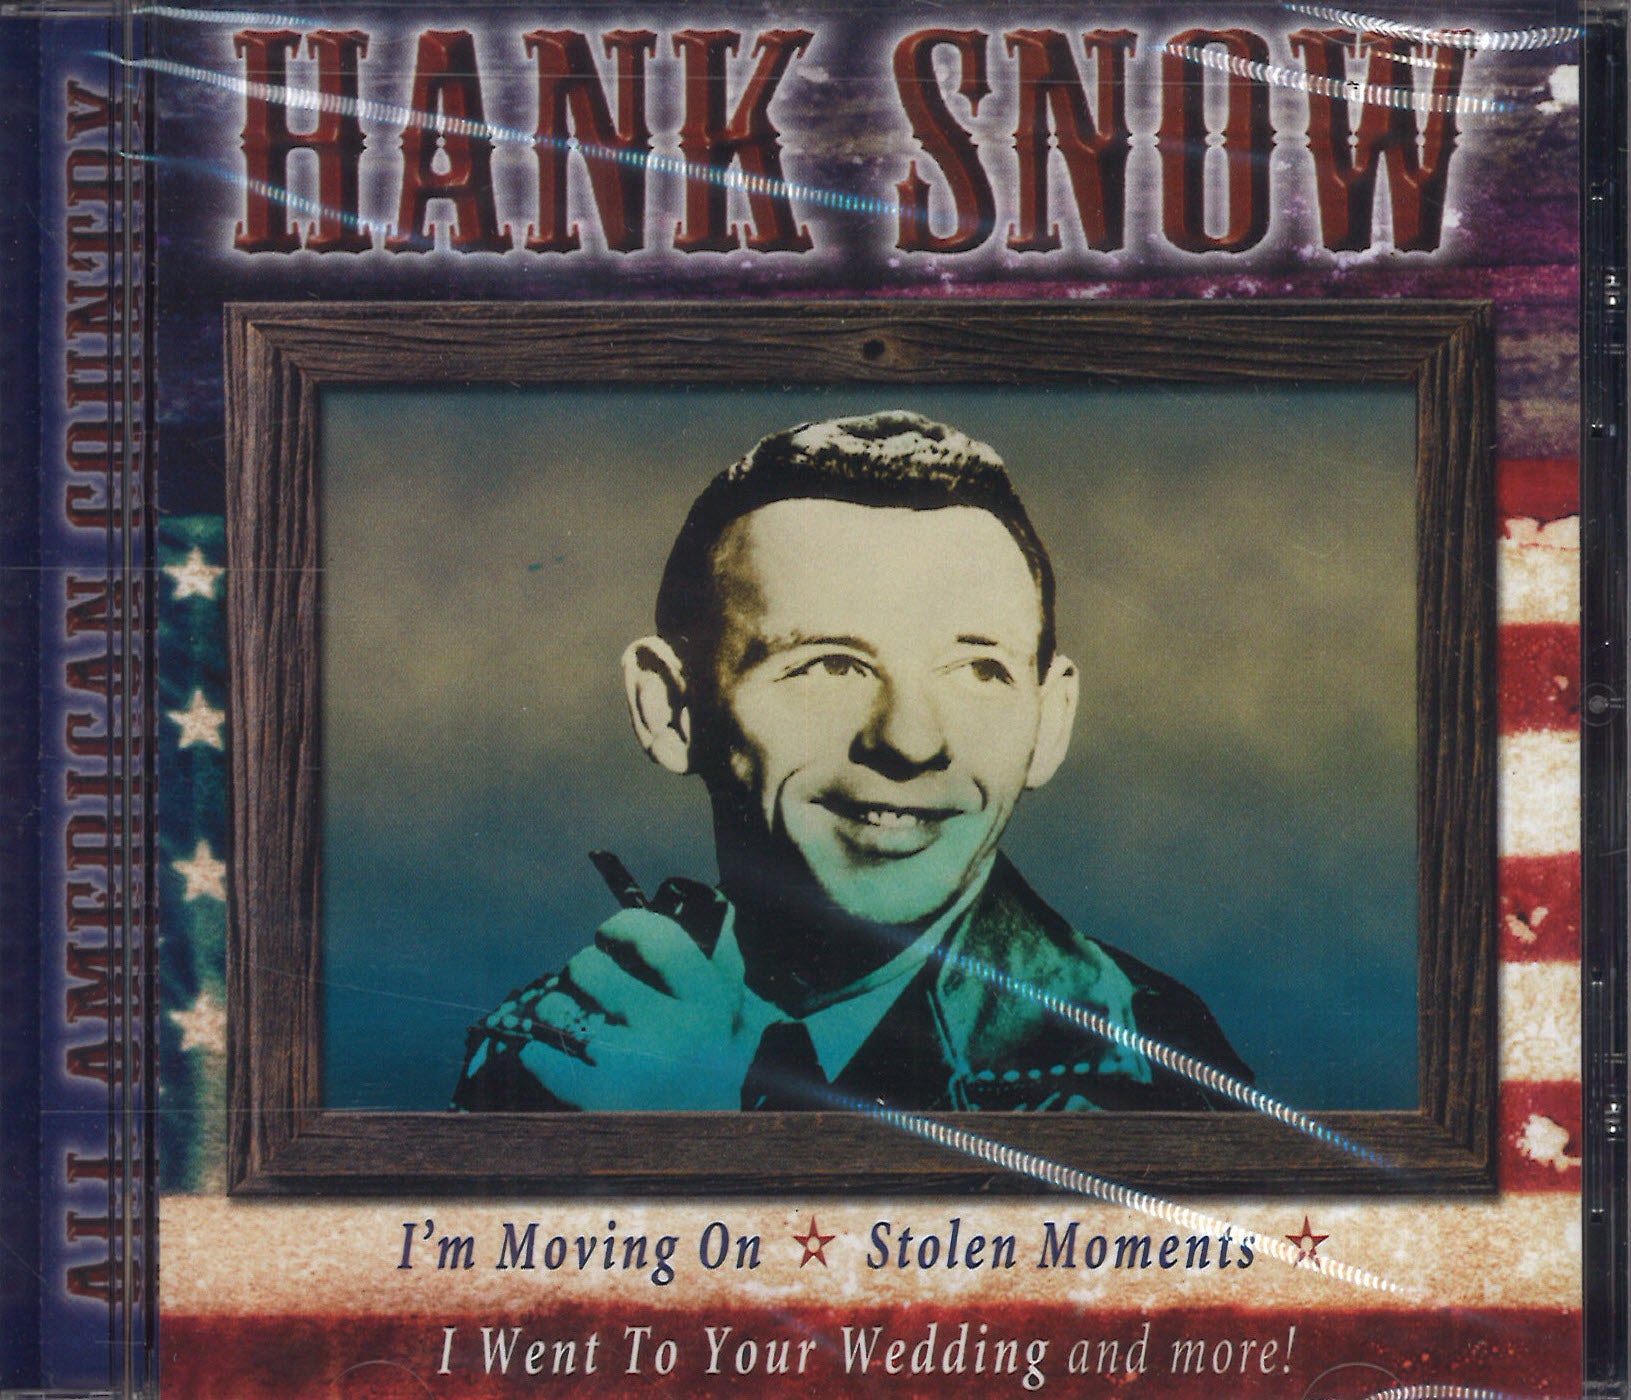 Hank Snow All American Country